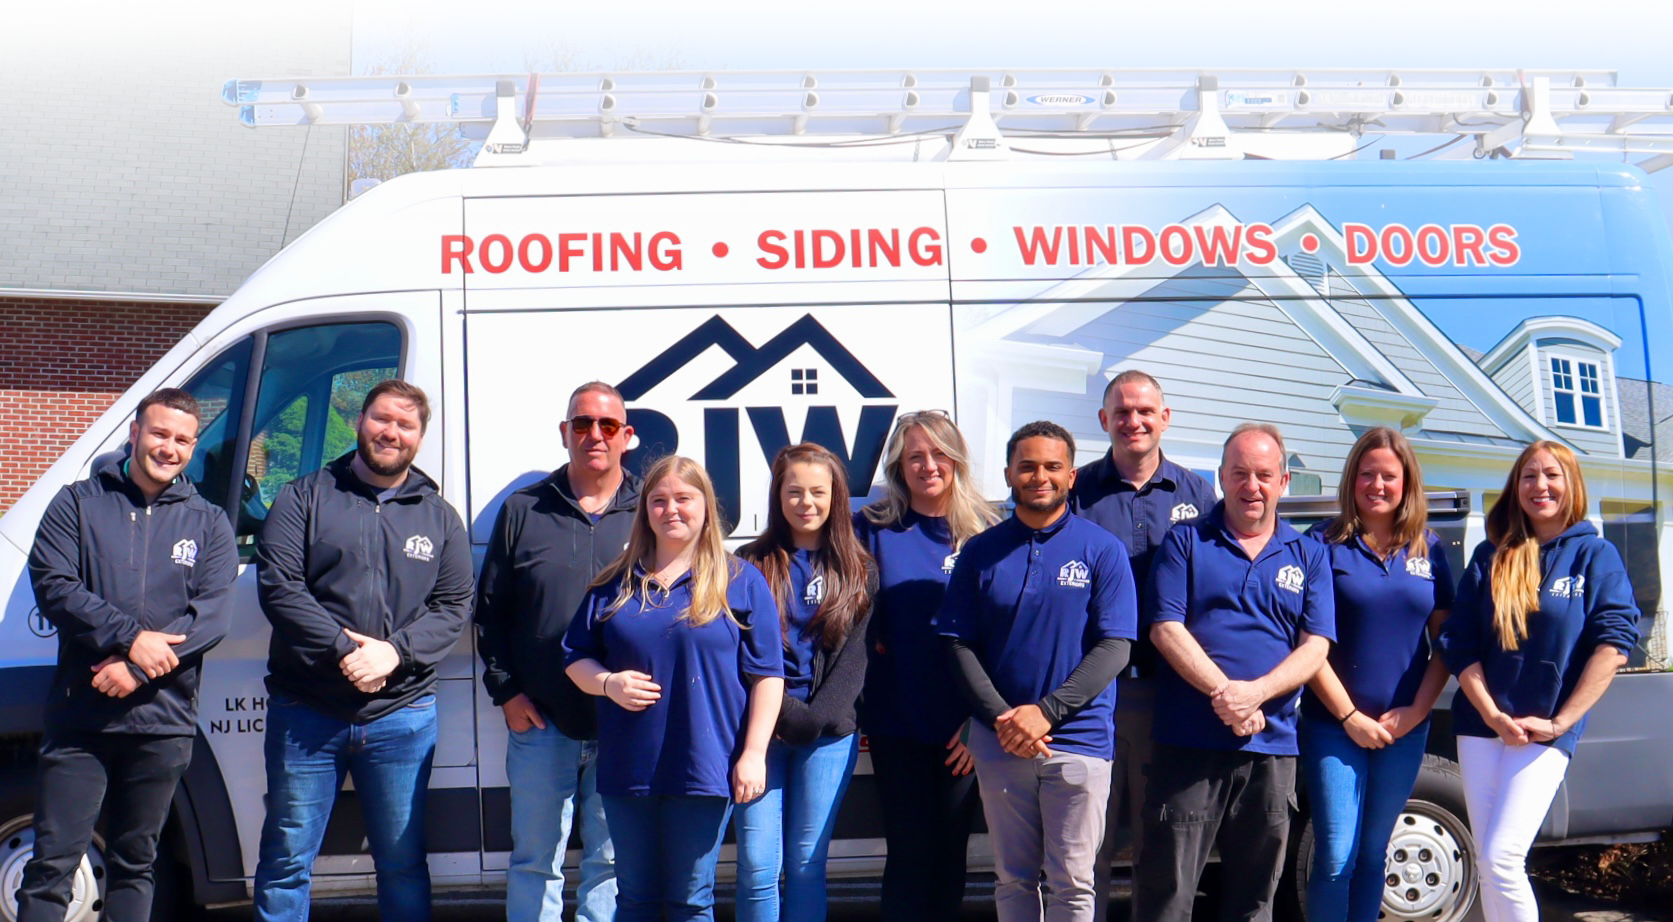 Group of eleven people in company uniforms standing in front of a branded van advertising roofing, siding, windows, and doors services.